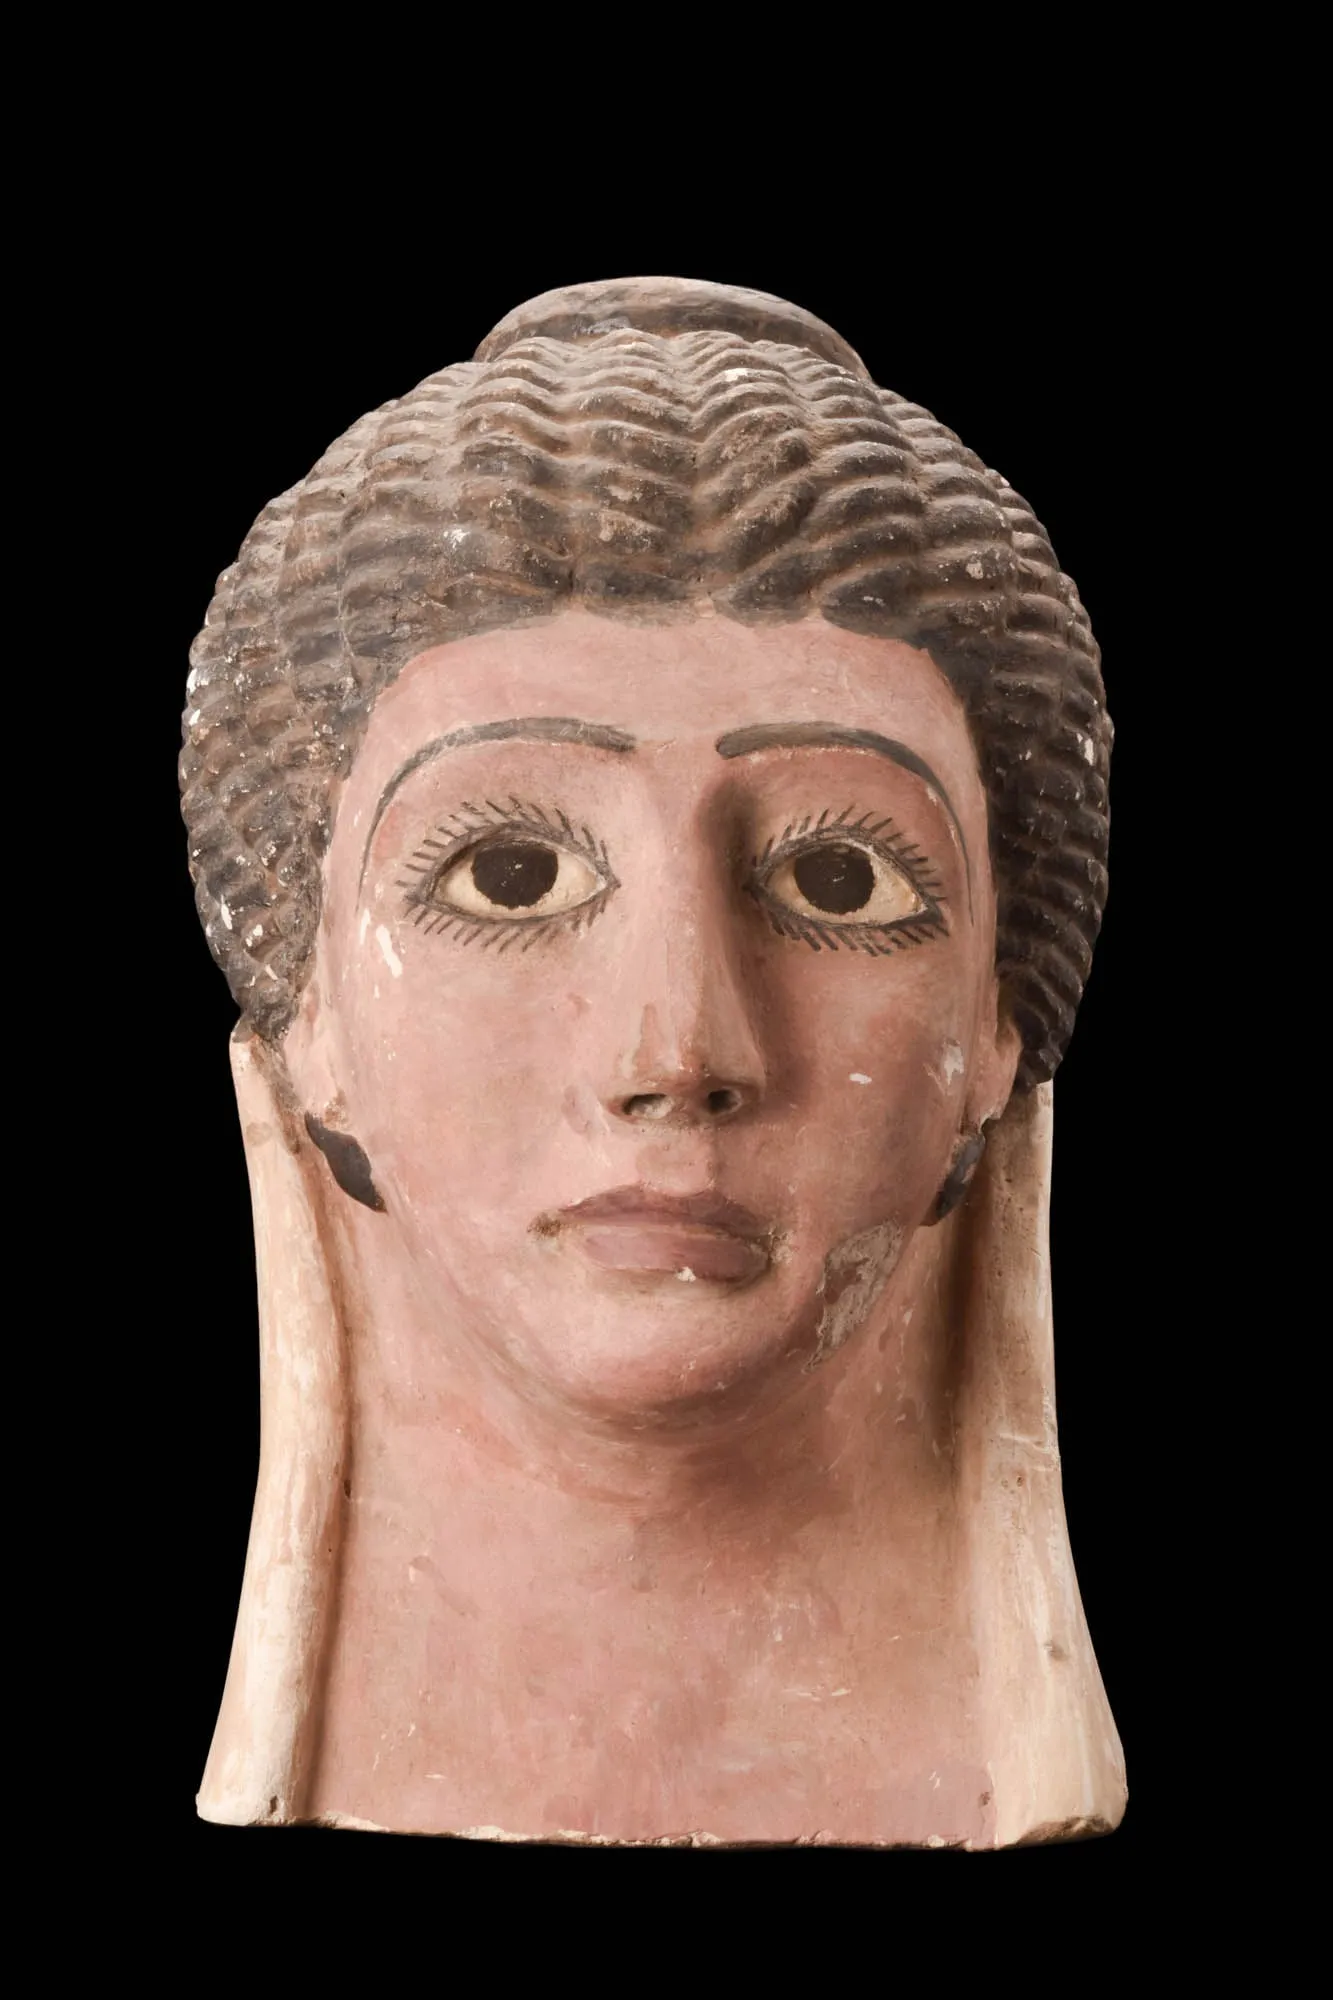 Circa 30 BC-323 AD Egyptian polychrome ceramic funerary mask of youthful female with braided hair and painted eyebrows, hair, lips, earrings and eyes, which have inset glass panels. Size: 275mm x 160mm (10.83in x 6.3in) Weight: 2.16kg (4lbs 12oz). Provenance: Property of an Israeli gentleman; acquired from Aaron Gallery, Berkeley Square, London W1 in 2011; formerly in the Issa collection, early 1980s. Opening bid: £5,000 ($6,400)